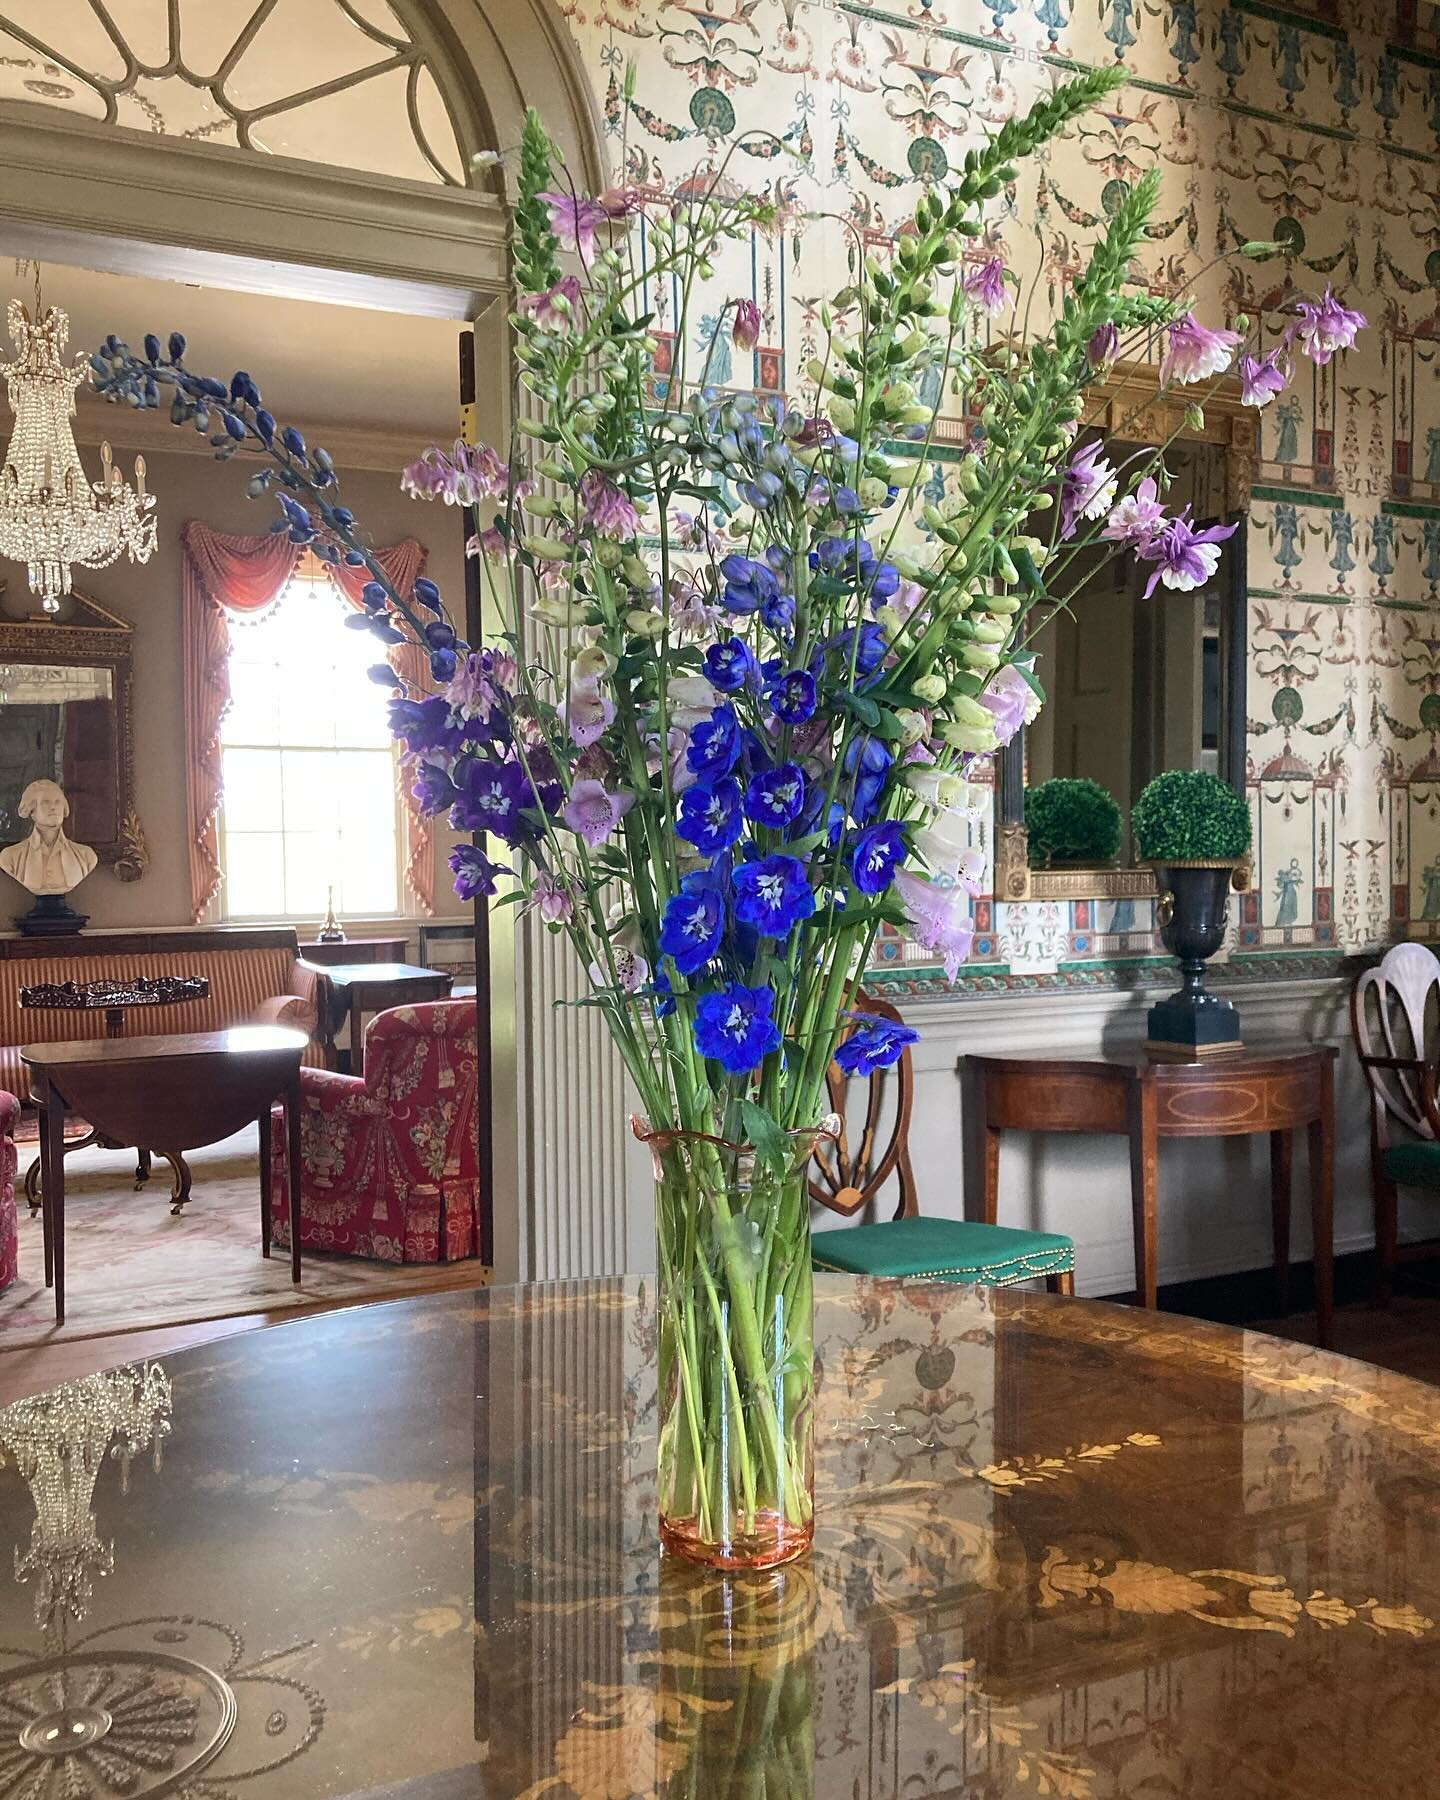 This week's bouquet for Strawberry Hill's guests is filled with foxglove, columbine, and delphinium from #thegardenatstrawberryhill.